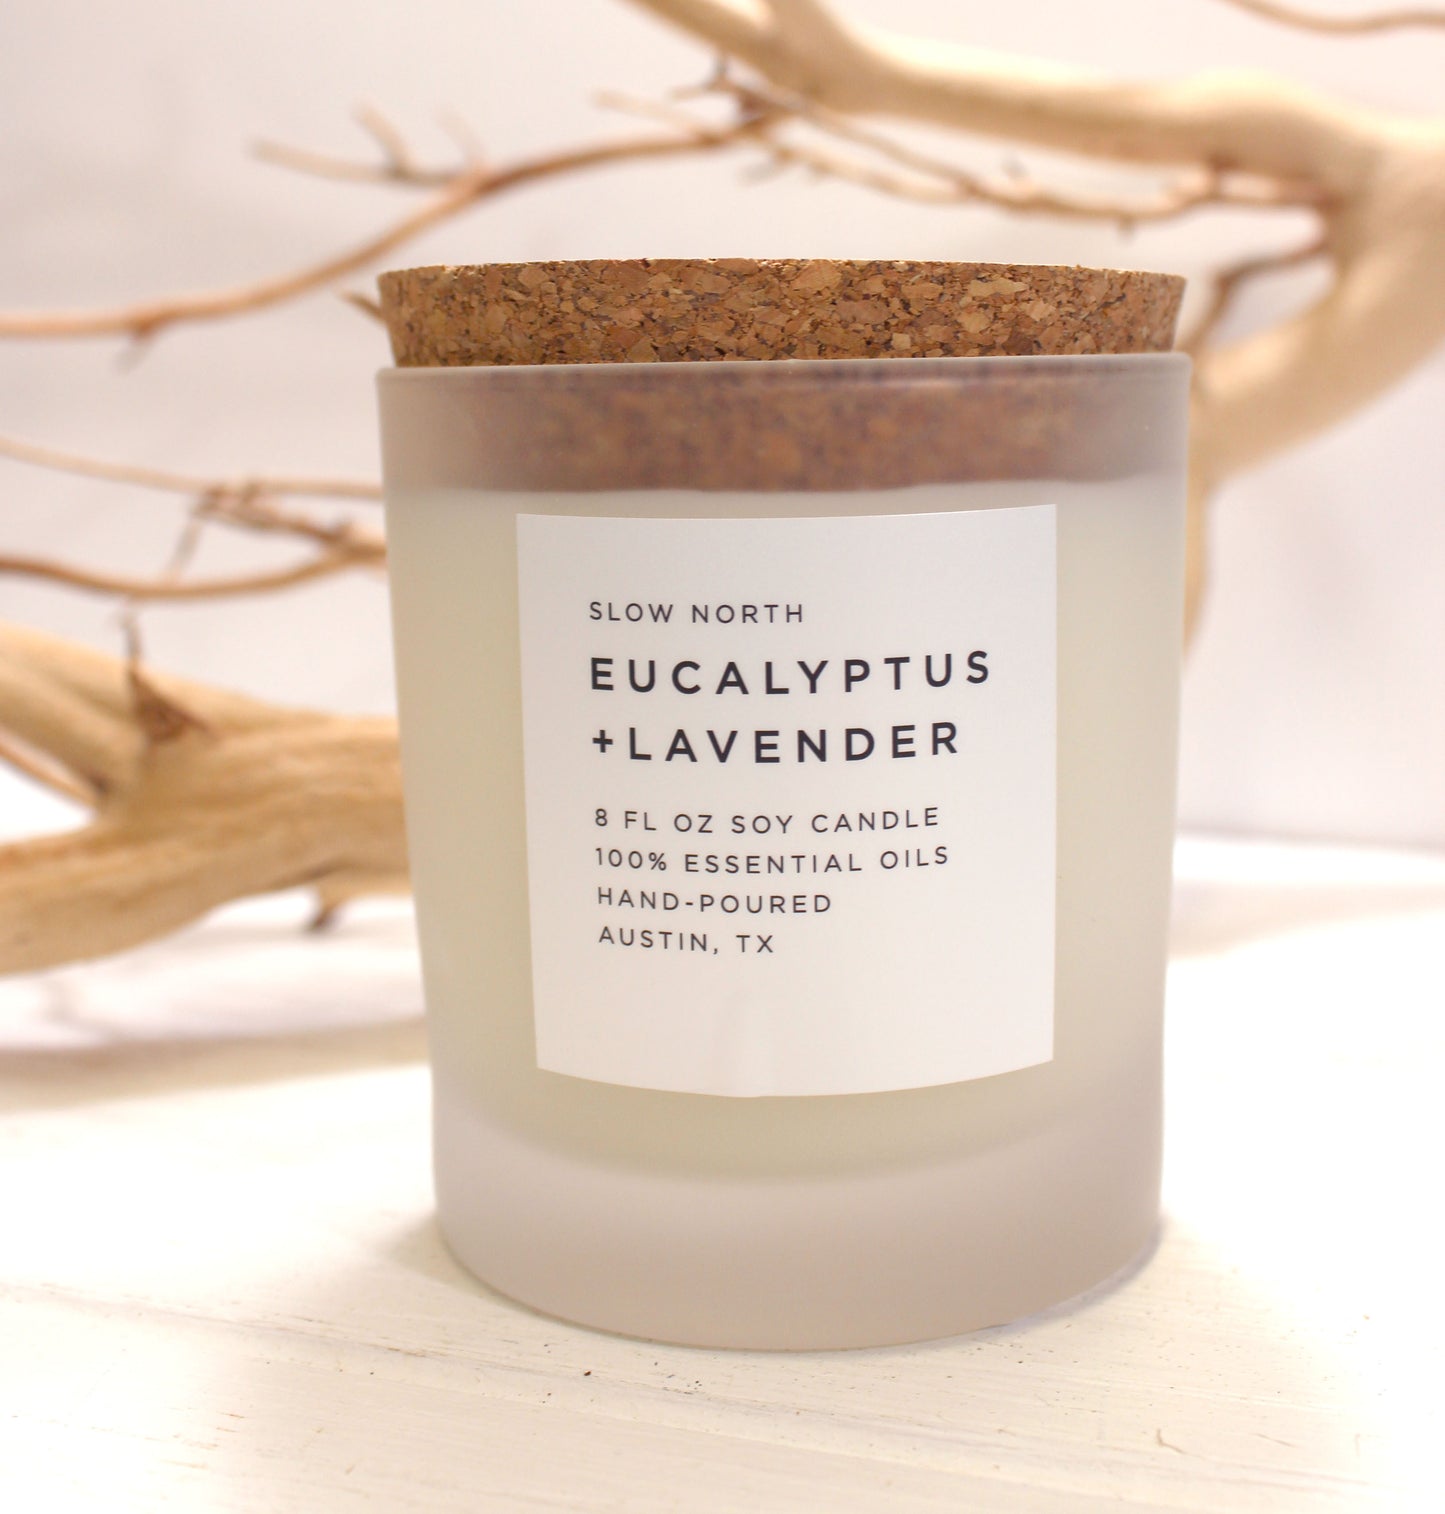 Eucalyptus + Lavender by Slow North